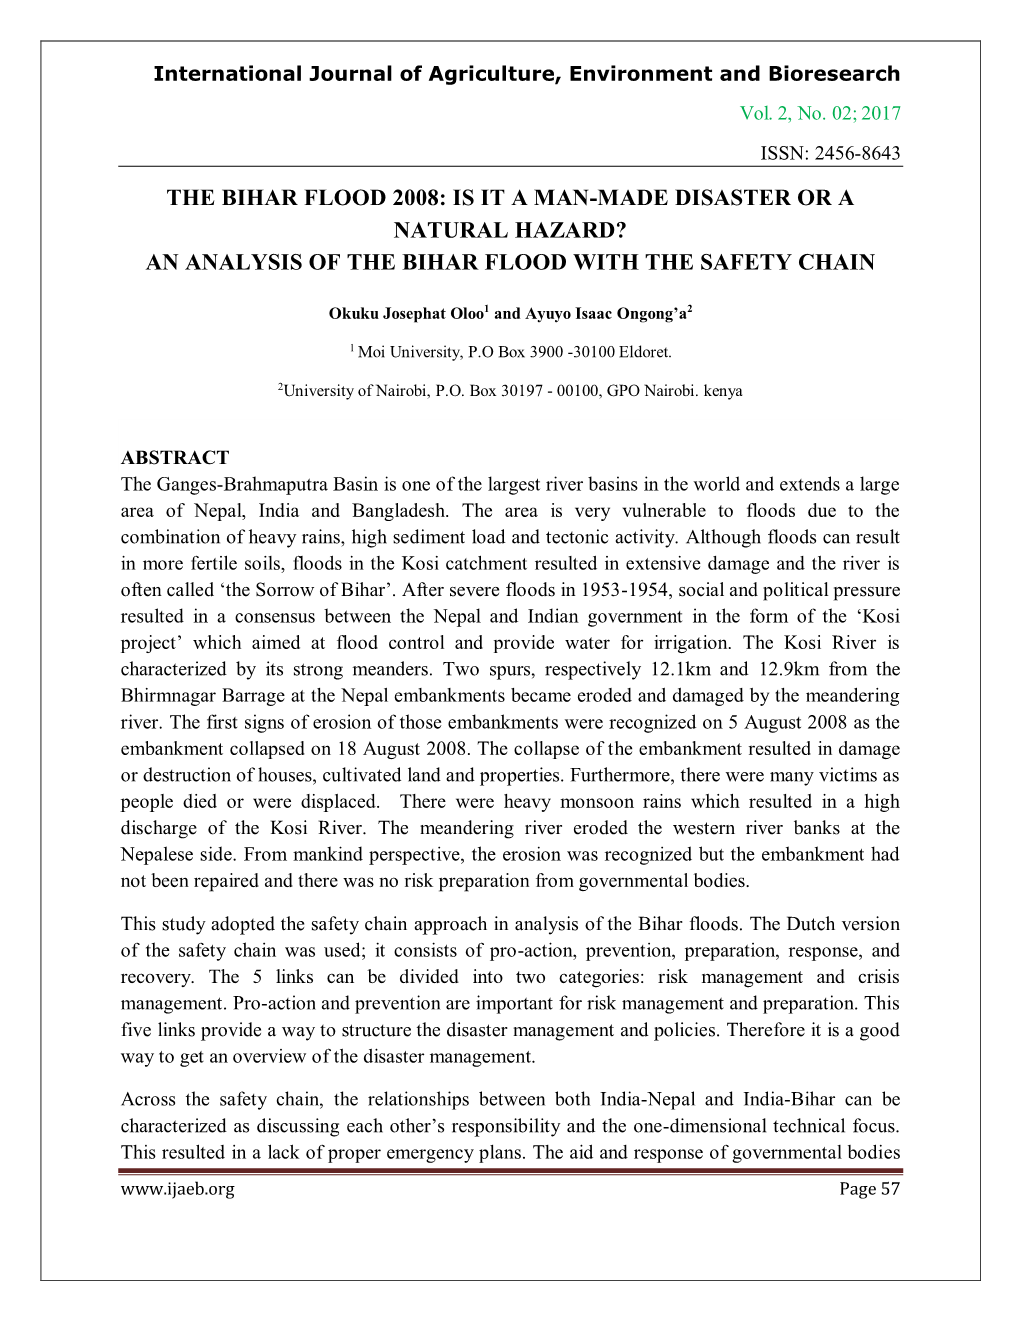 The Bihar Flood 2008: Is It a Man-Made Disaster Or a Natural Hazard? an Analysis of the Bihar Flood with the Safety Chain